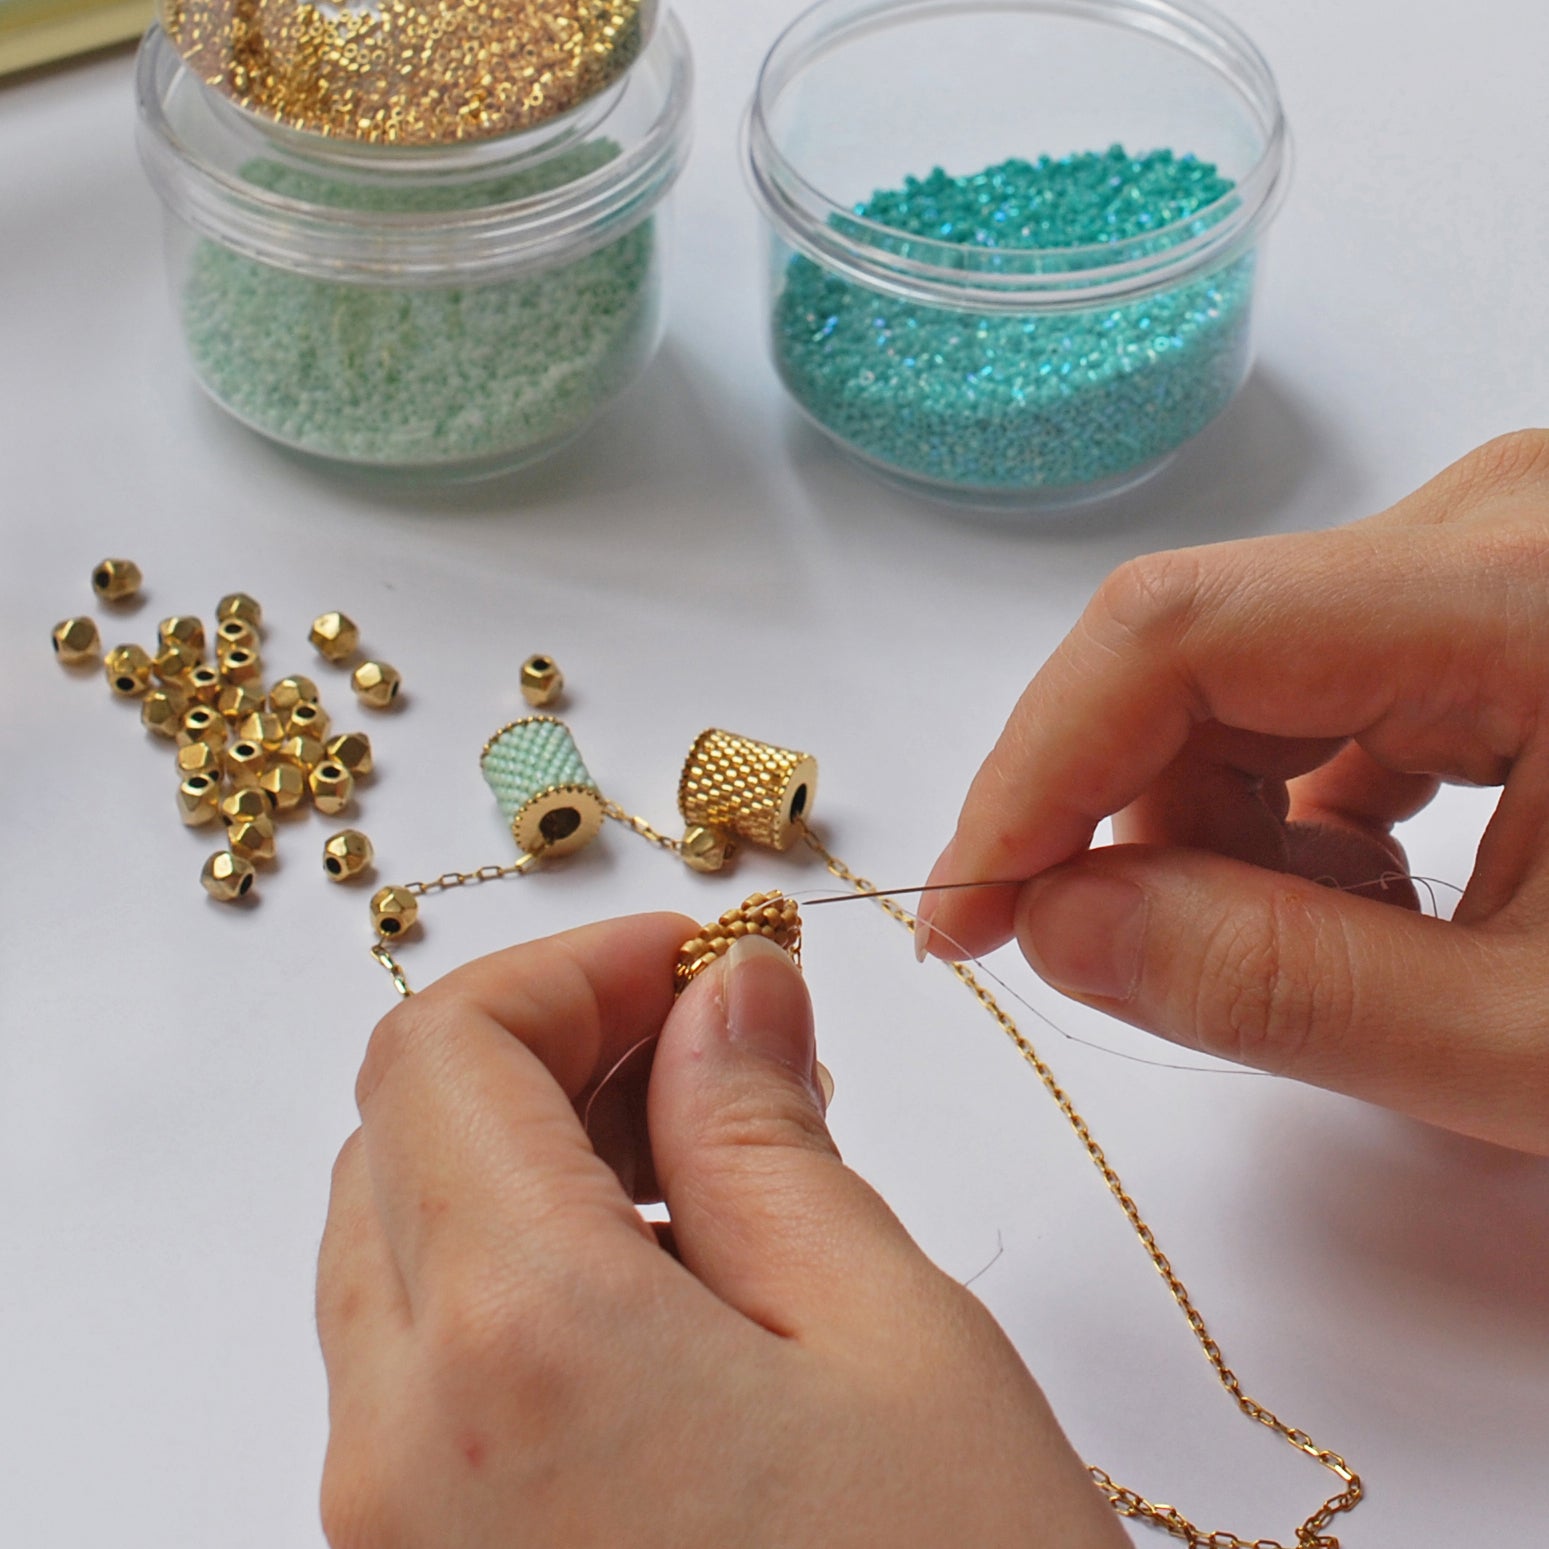 The Art Of Sewing With Beads